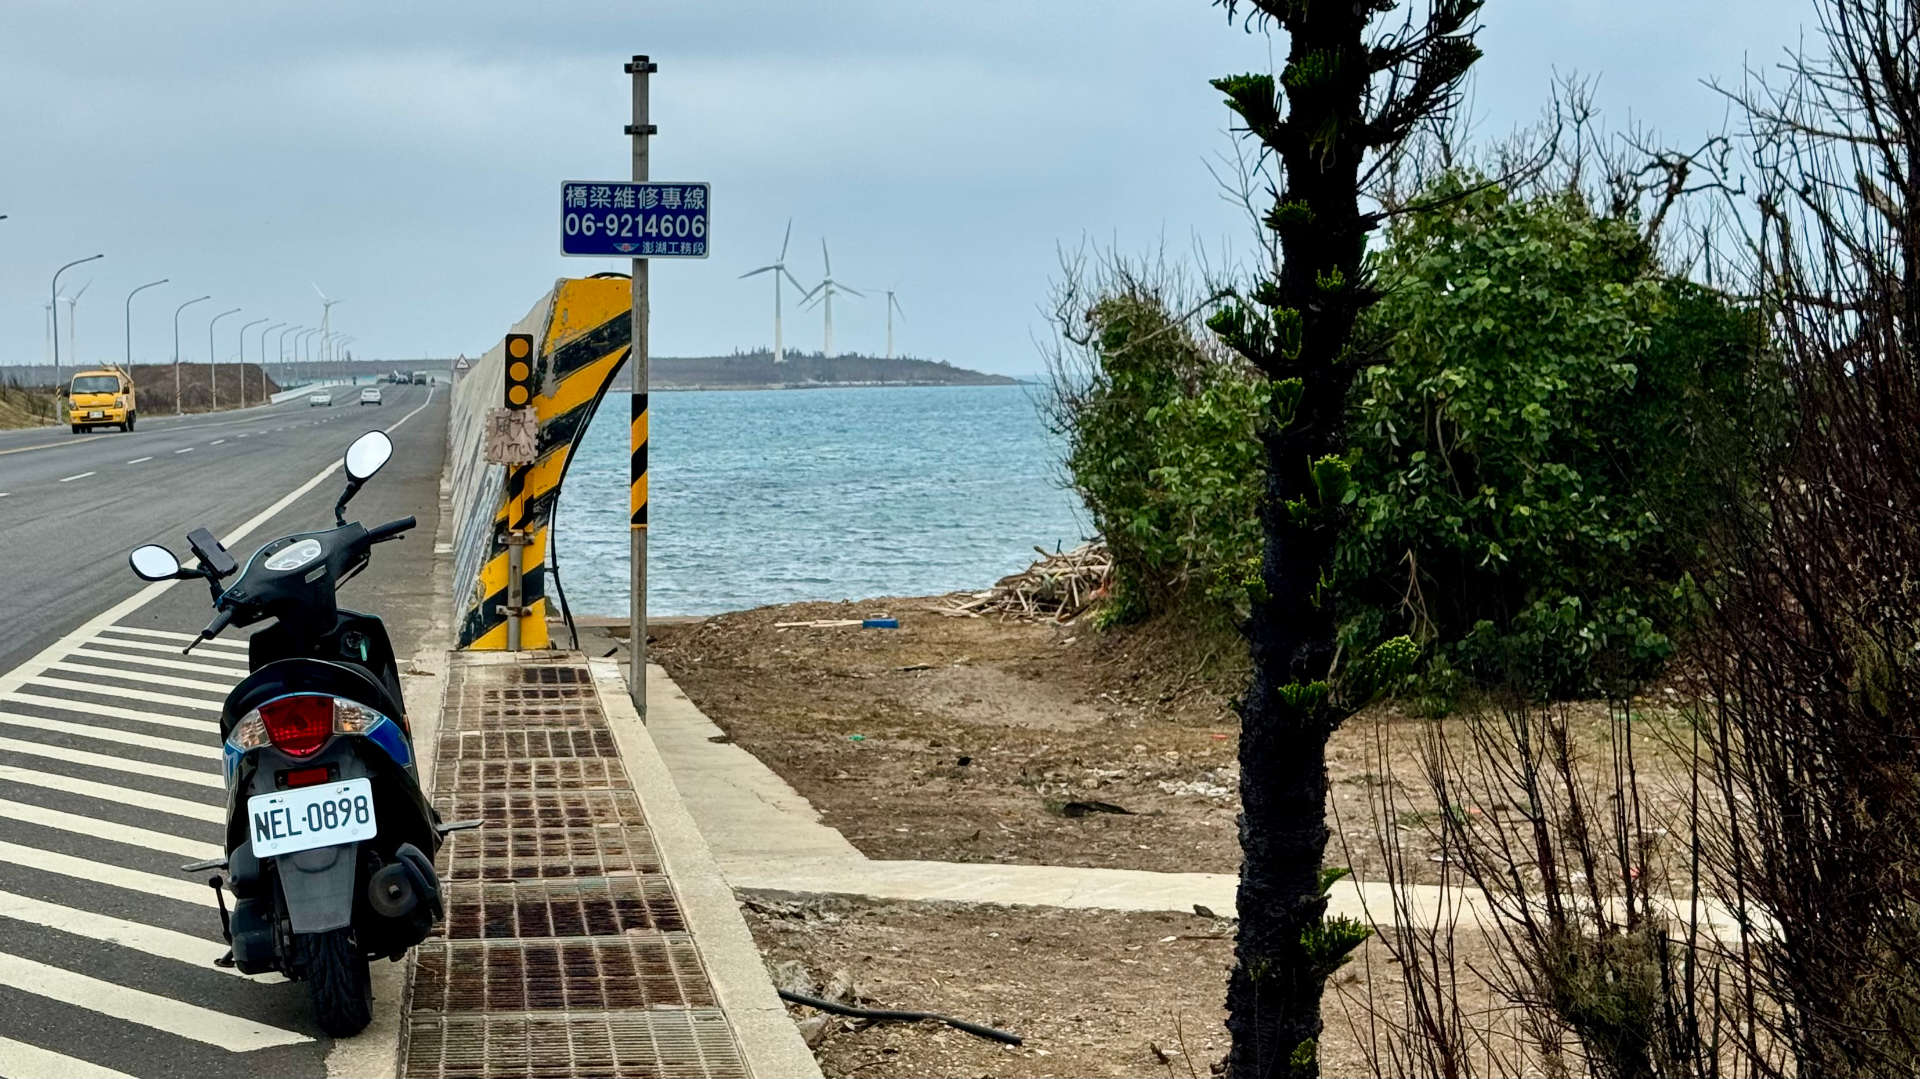 A scooter parked next to a bridge, with wind turbines on the island in the distance.